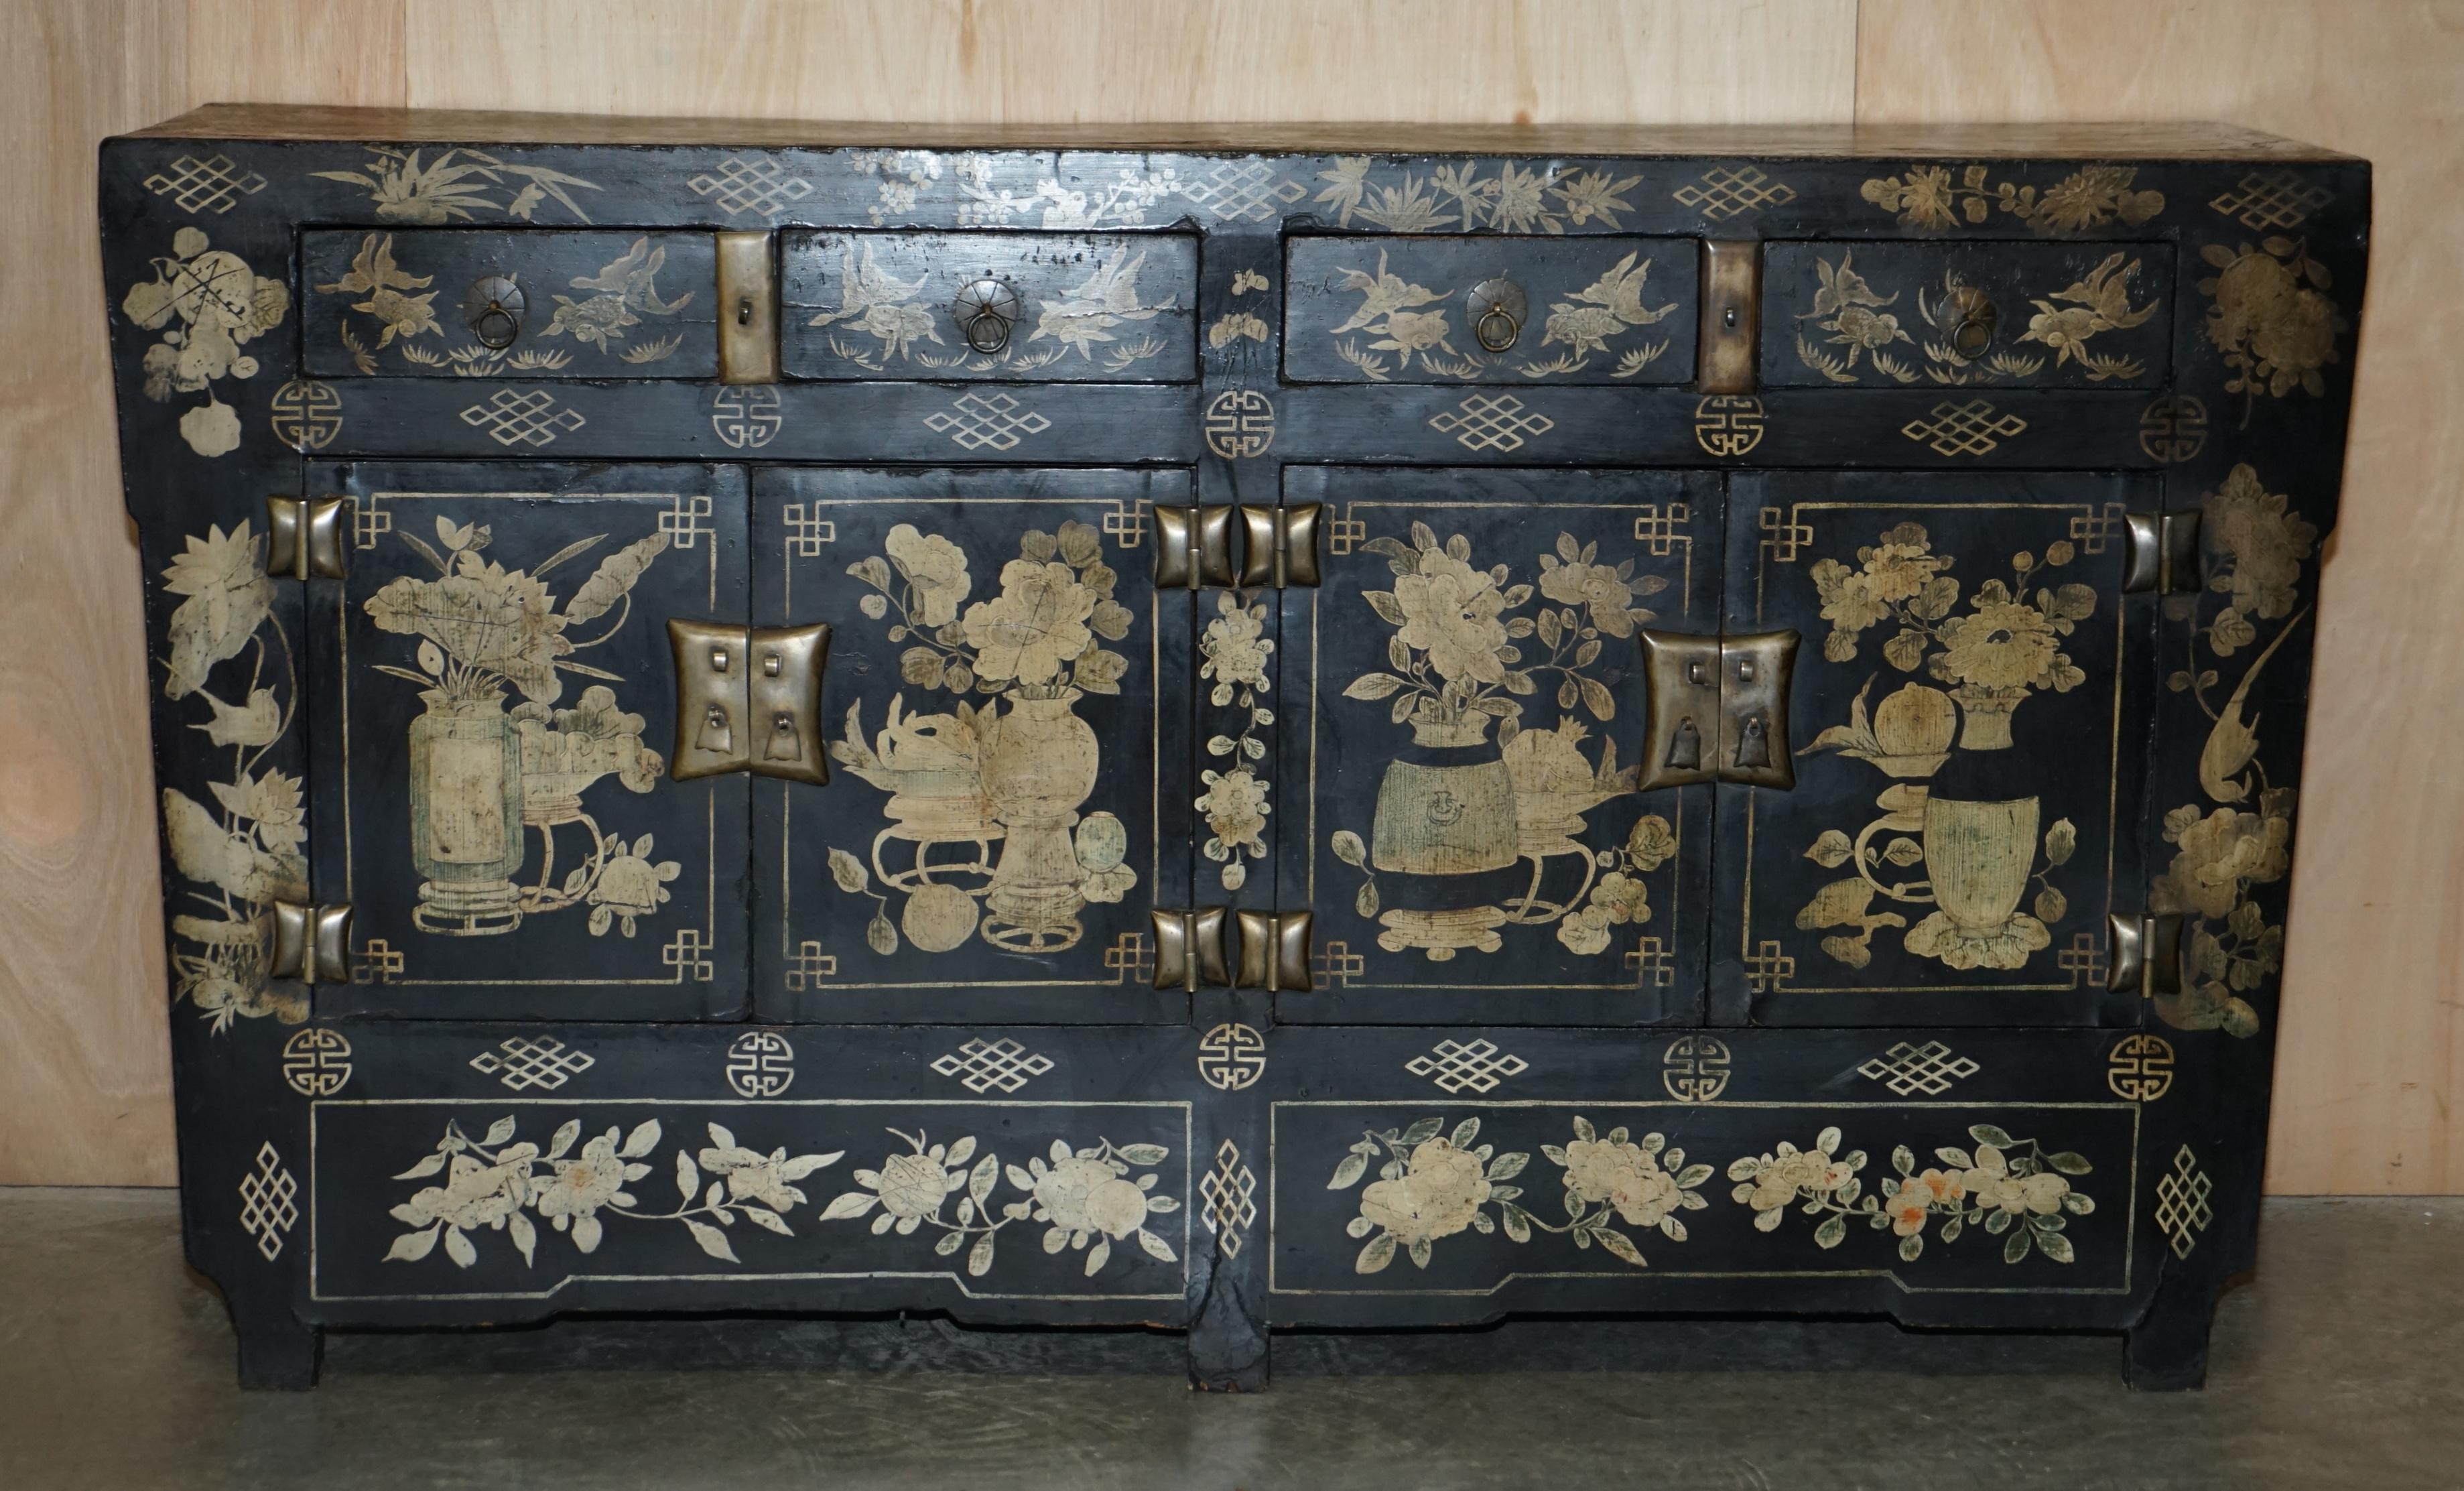 We are delighted to offer for sale this original circa 1860 hand made in China sold hand carved, painted and lacquered sideboard with Chinoiserie detailing all over.

This is a very good-looking and decorative piece, it offers a great deal of